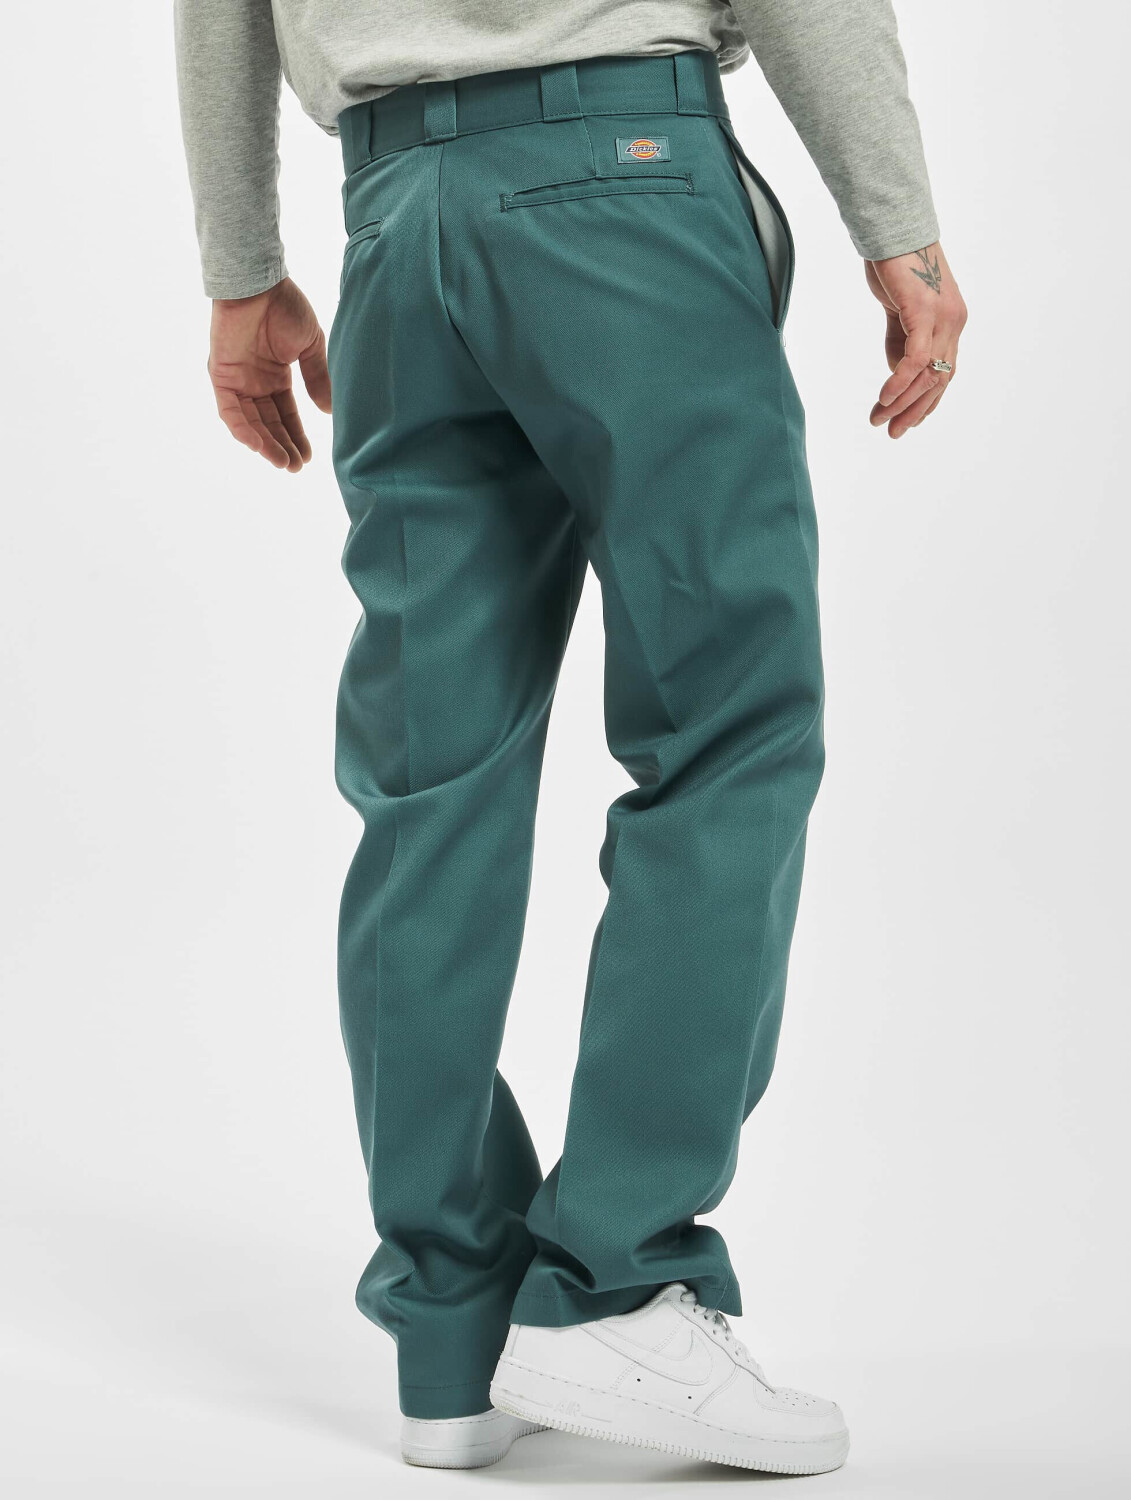 Buy Dickies Original Work Pant (874) lincoln green from £49.22 (Today) –  Best Deals on